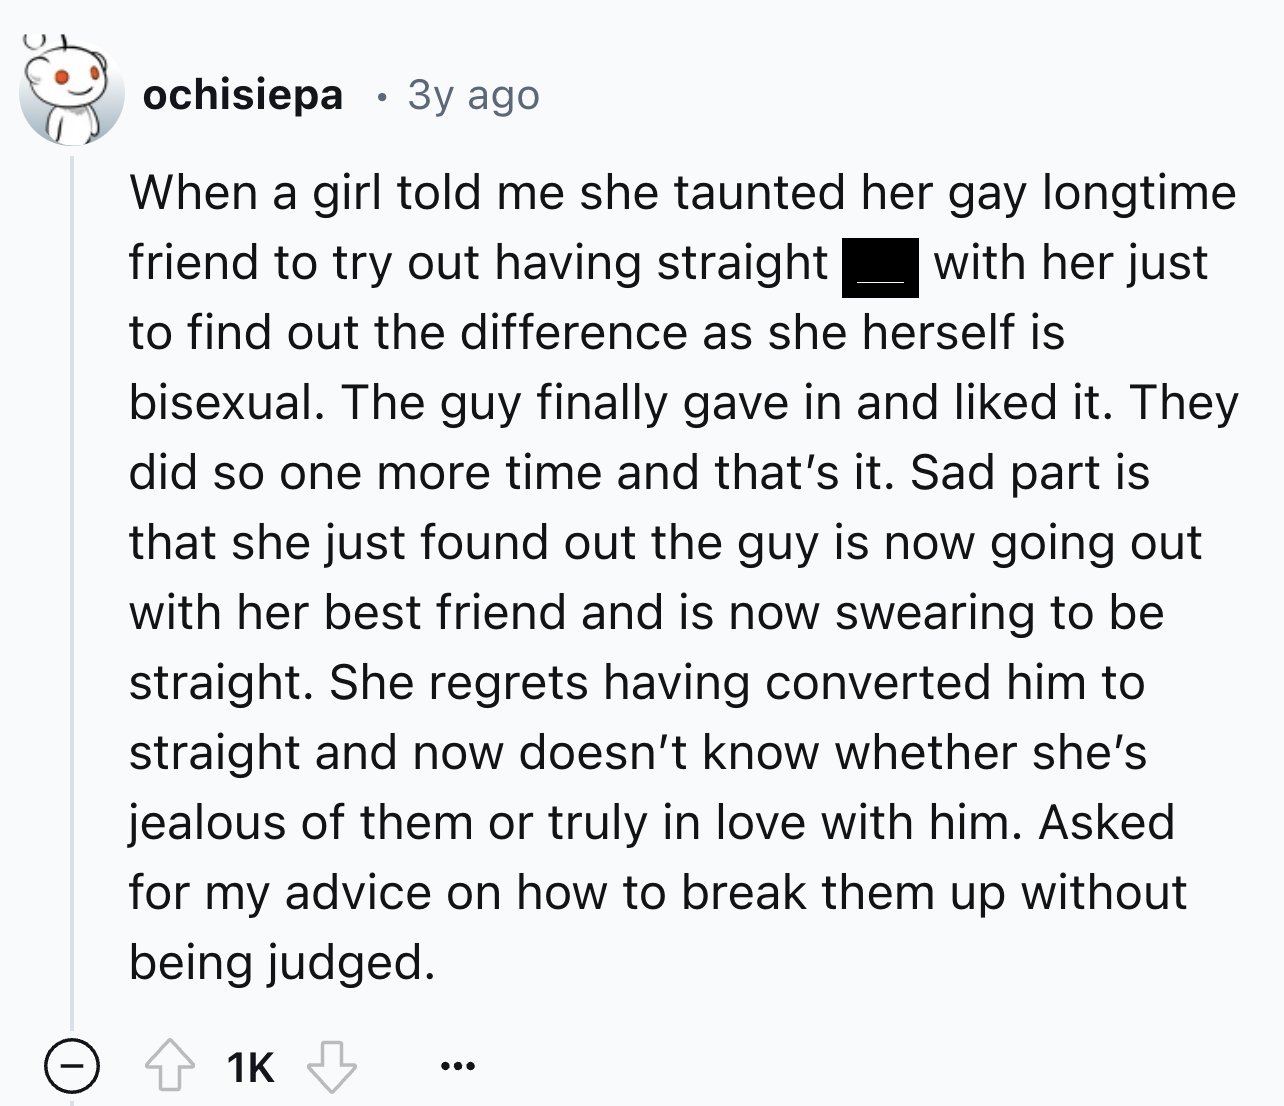 screenshot - ochisiepa 3y ago When a girl told me she taunted her gay longtime friend to try out having straight with her just to find out the difference as she herself is bisexual. The guy finally gave in and d it. They did so one more time and that's it